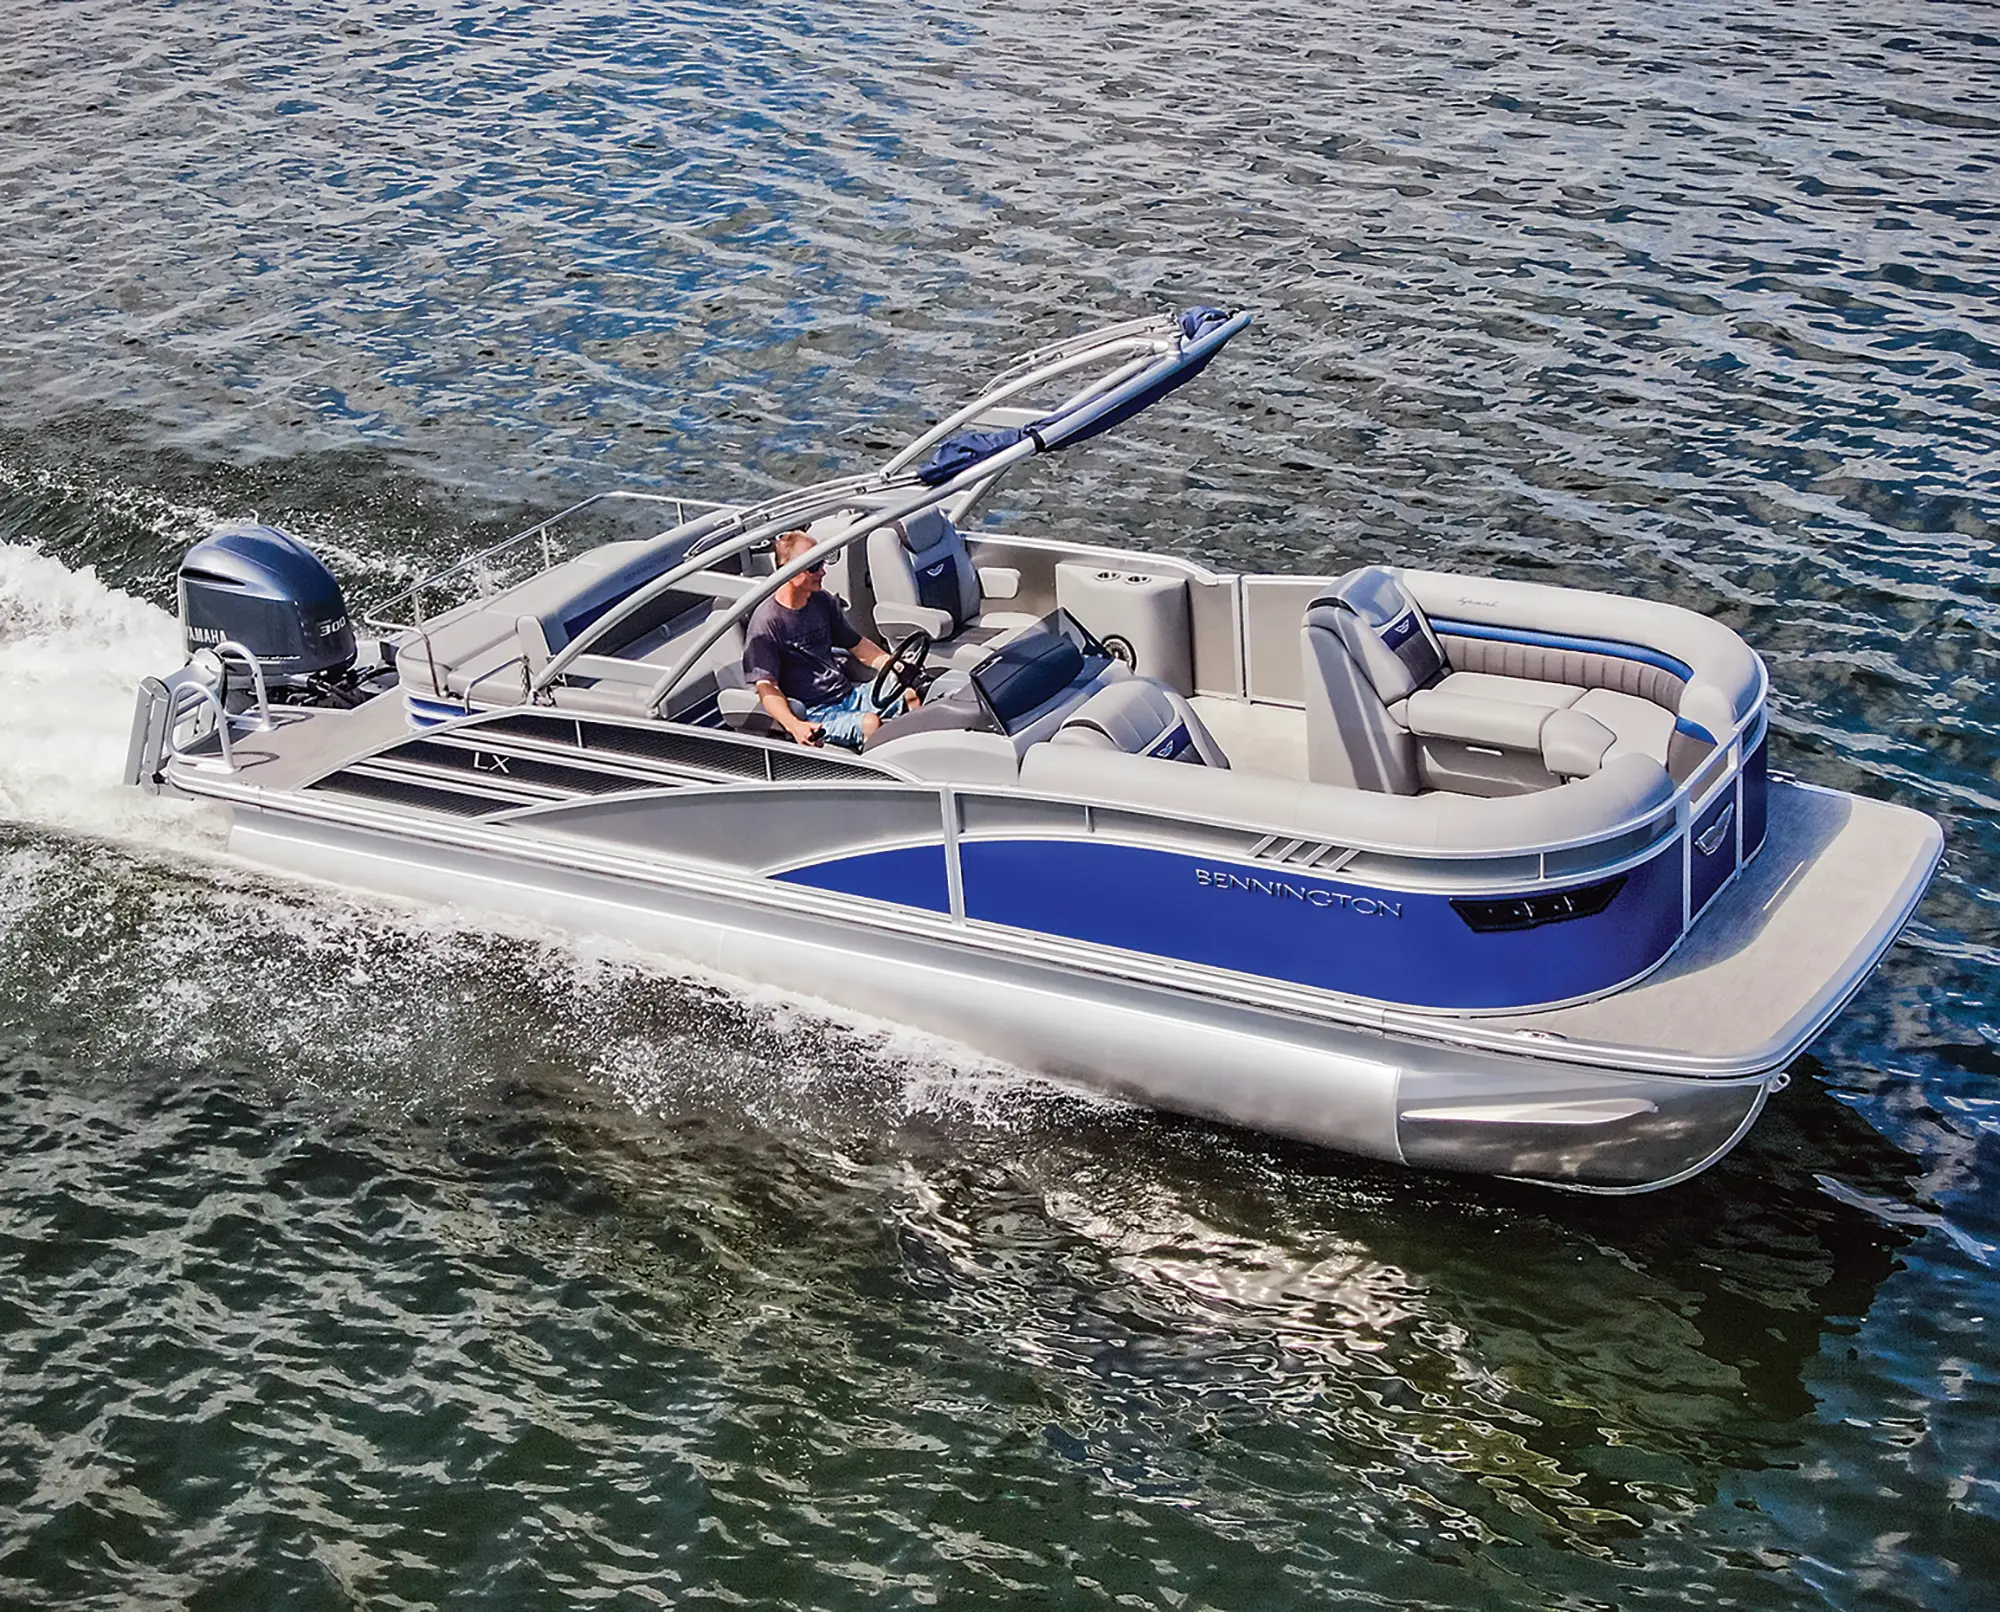 Aerial side view of the Bennington Sport 24 LXSSBA pontoon motorboat vehicle as a man is seen driving out in the water during the day